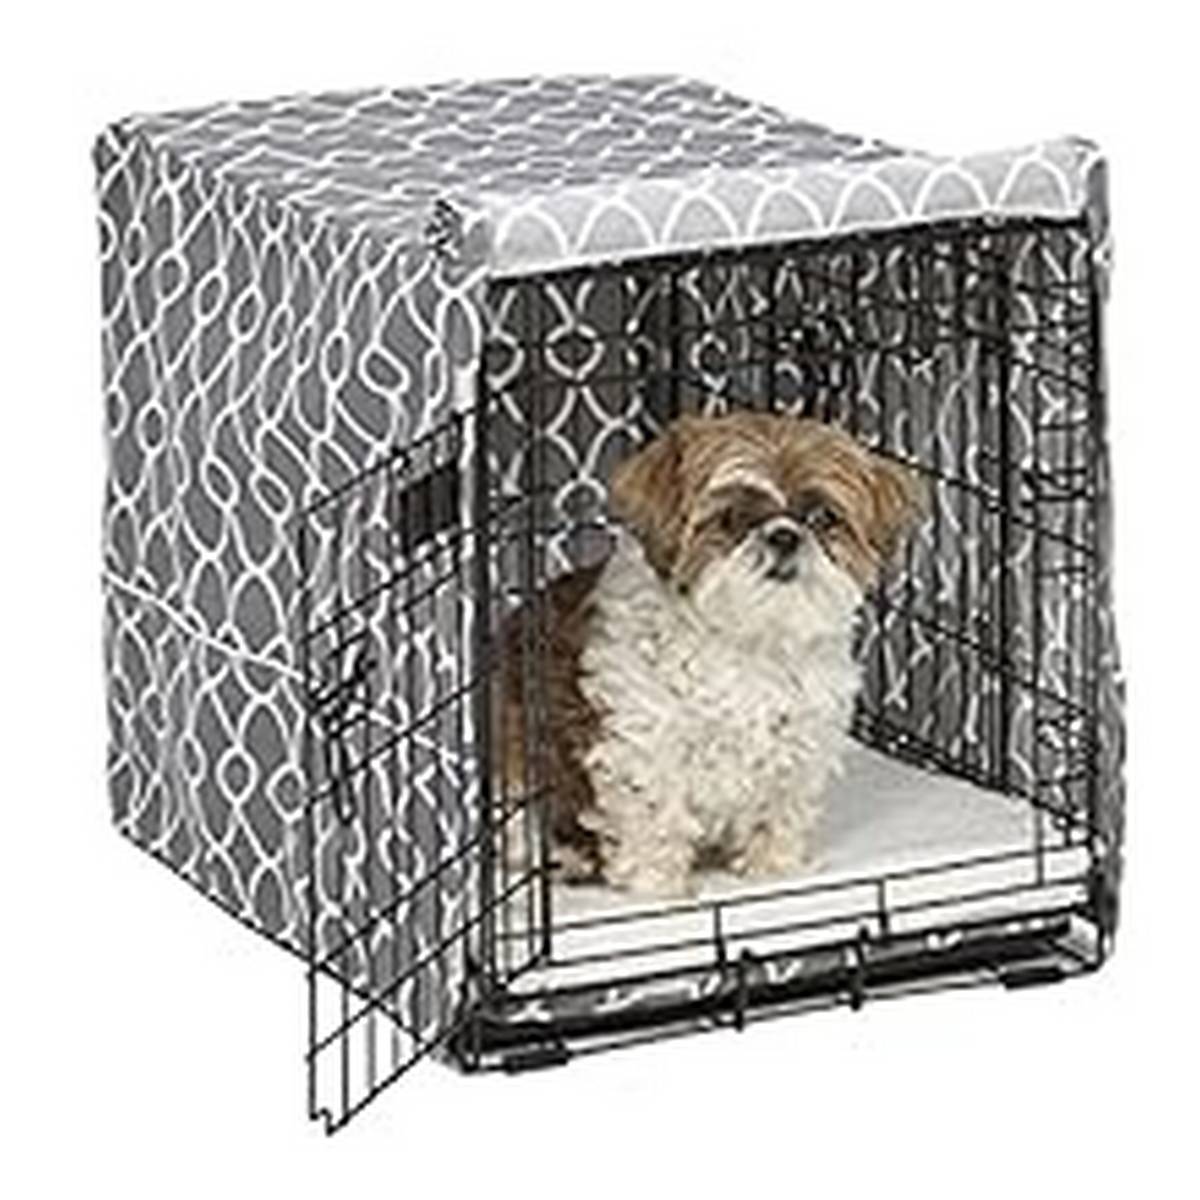 Supplies_MidWest Homes for Pets Dog Crate Cover Privacy Dog Crate Cover Fits MidWest Dog Crates- Machine Wash & Dry